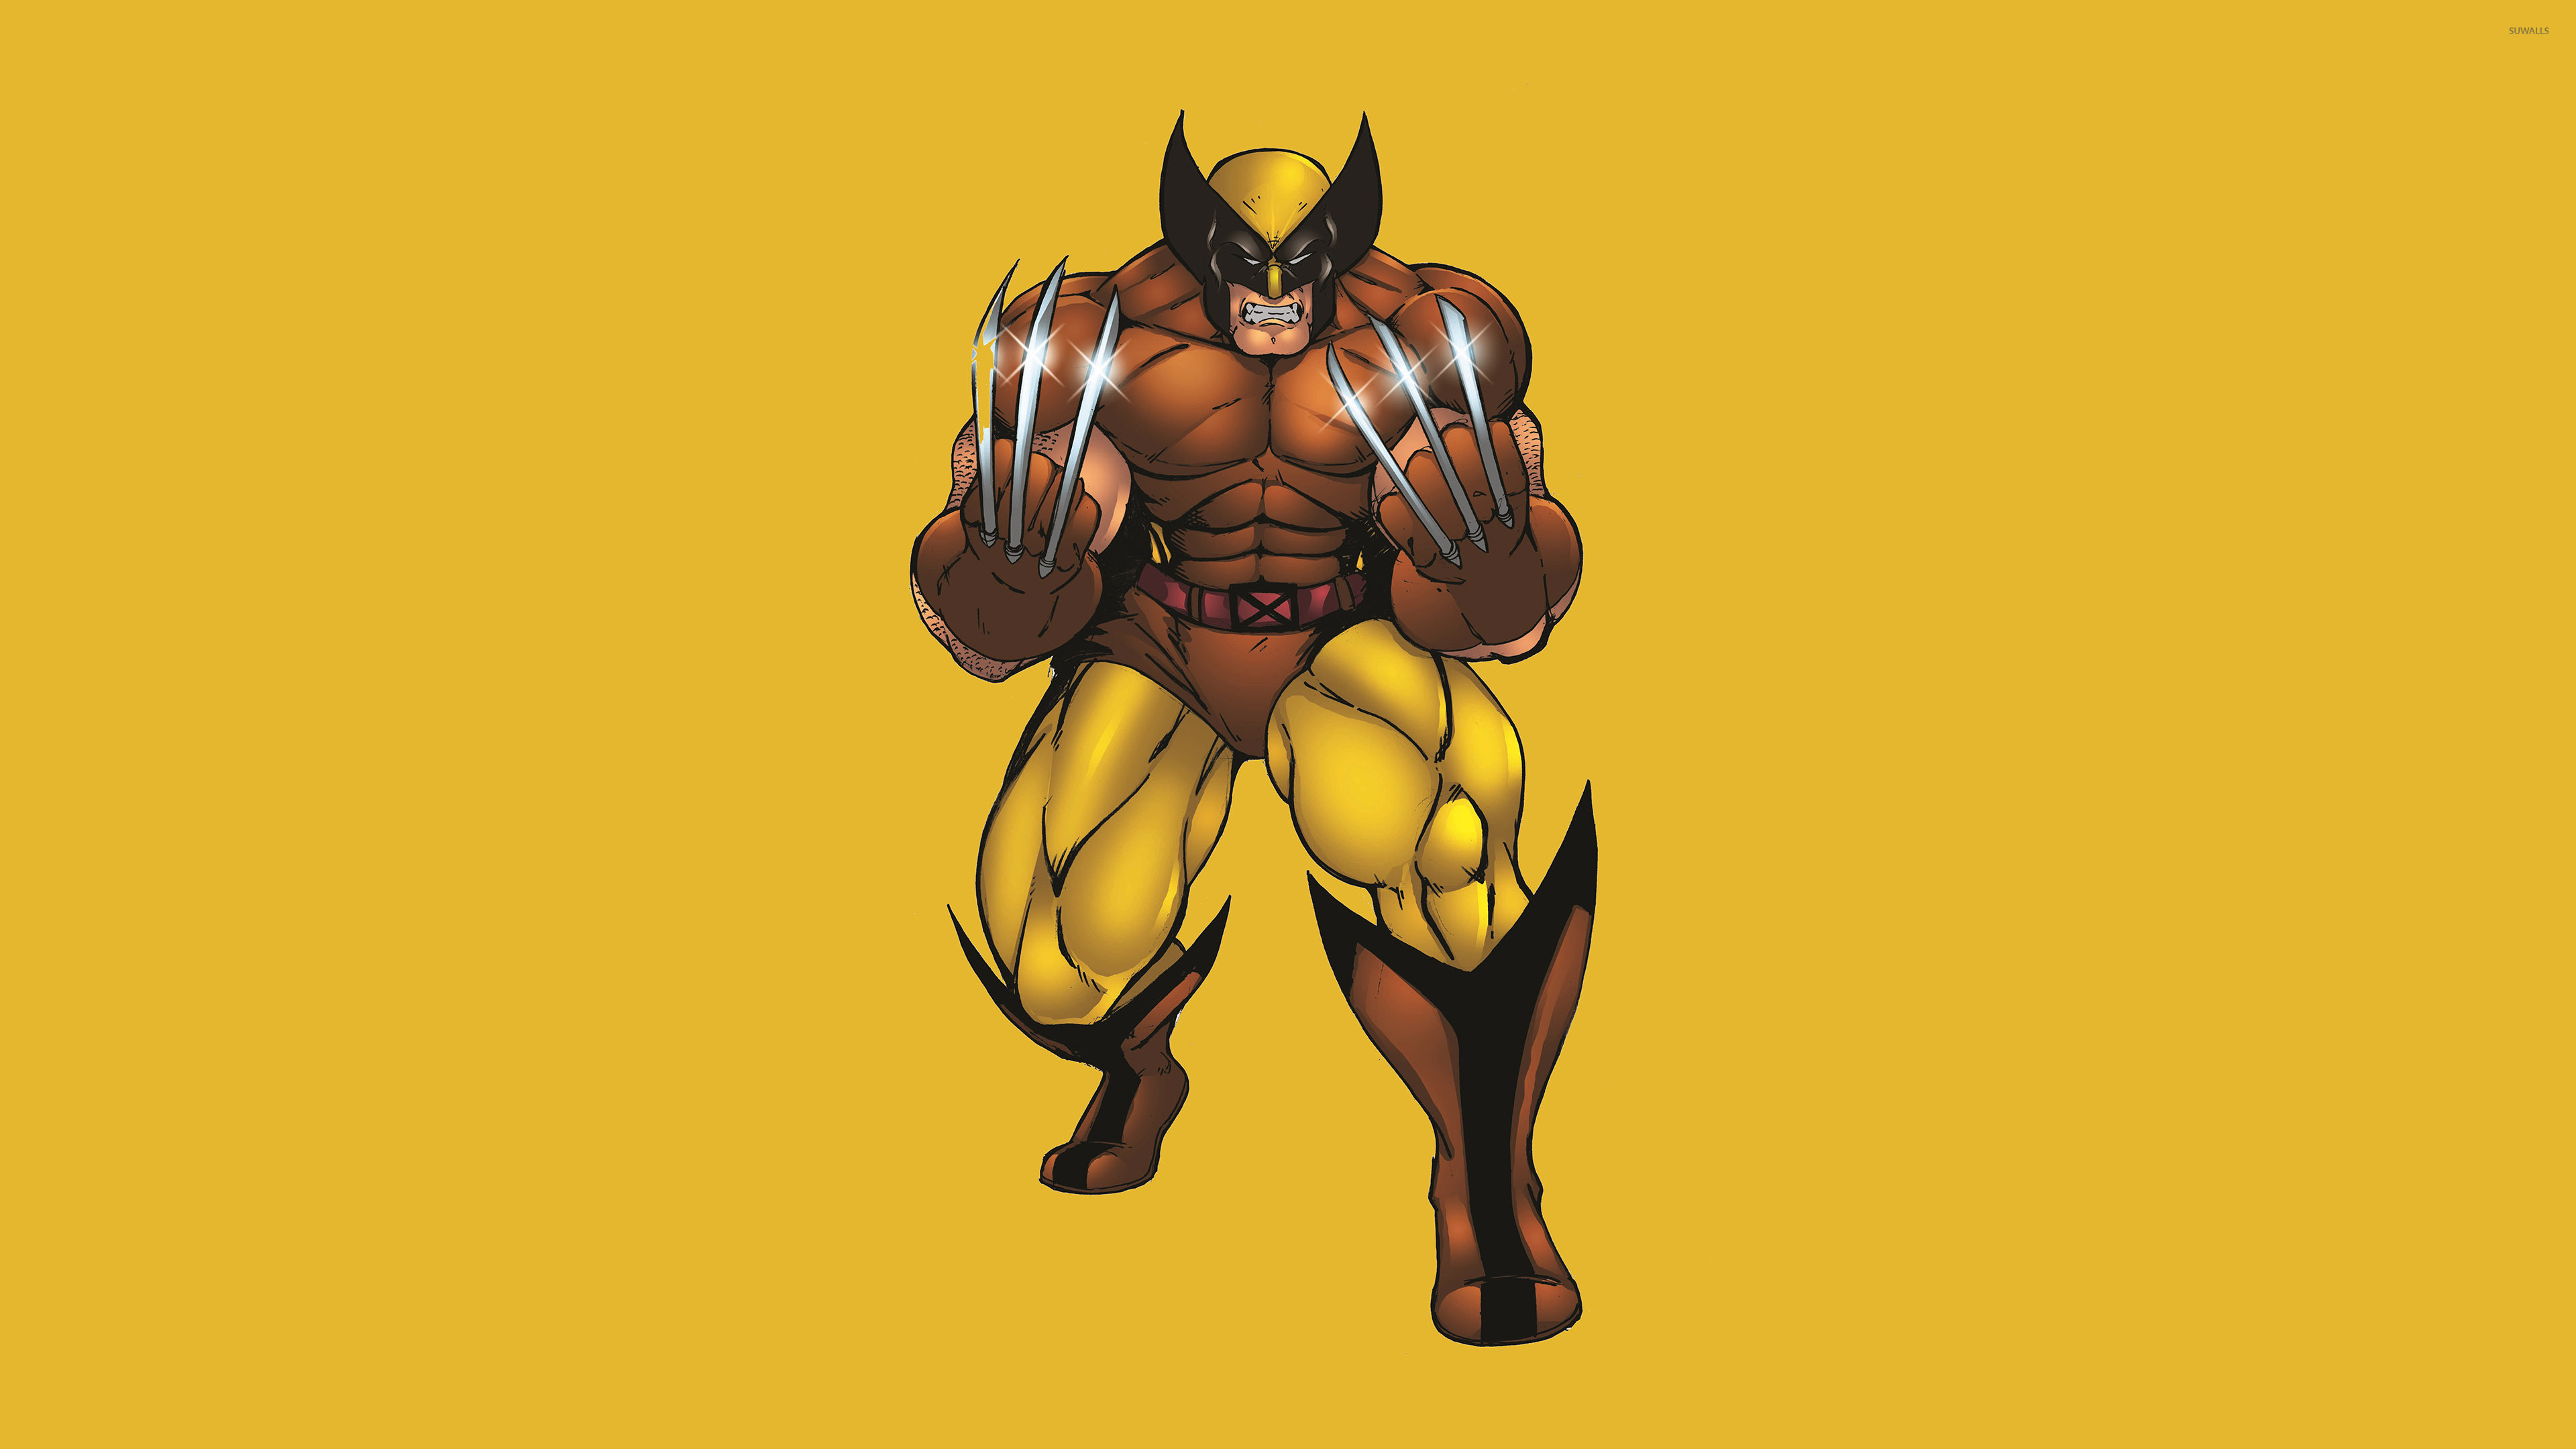 3840x2160 Wolverine with silver claws wallpaper